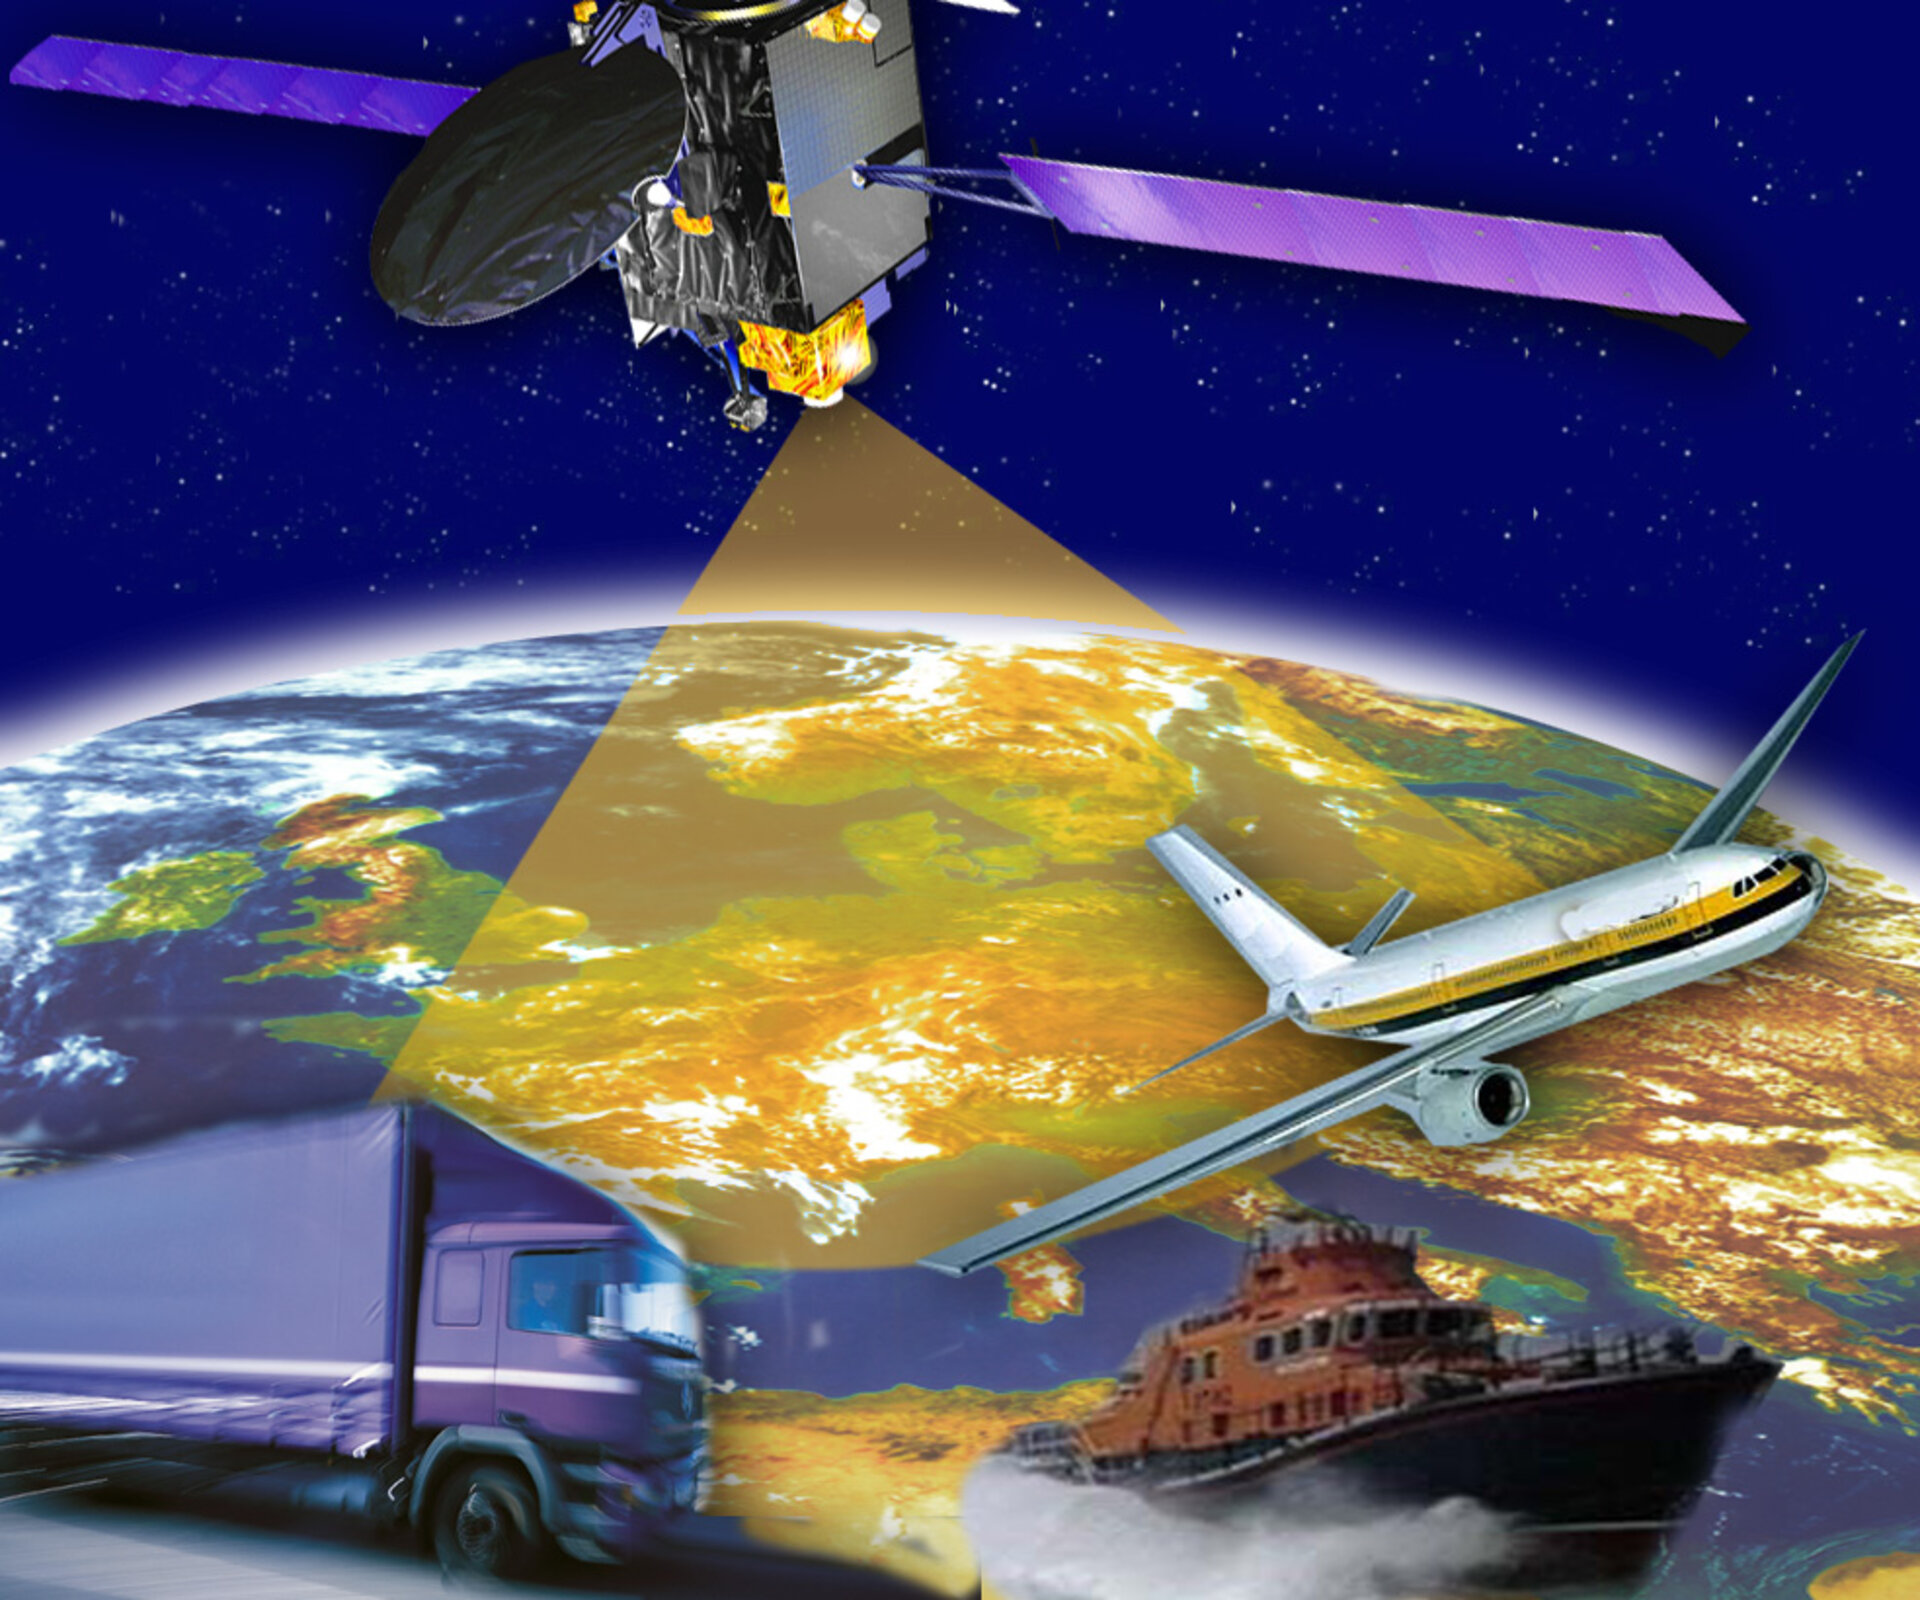 Using space technology for civil aviation